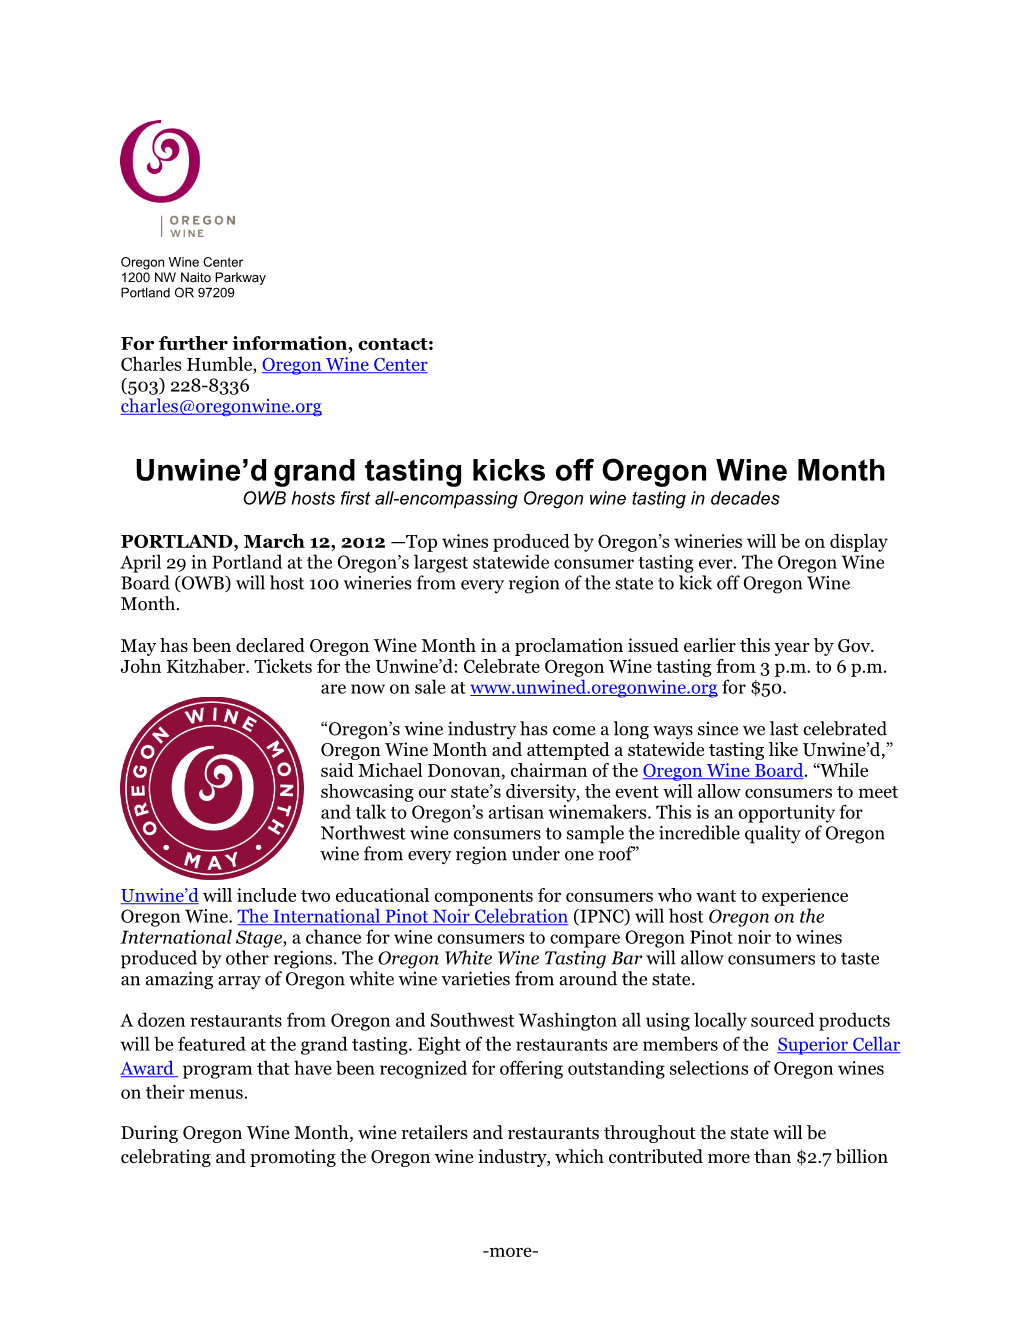 Unwine'd Is a Benefit for the Trust for Oregon Wine Education and Research